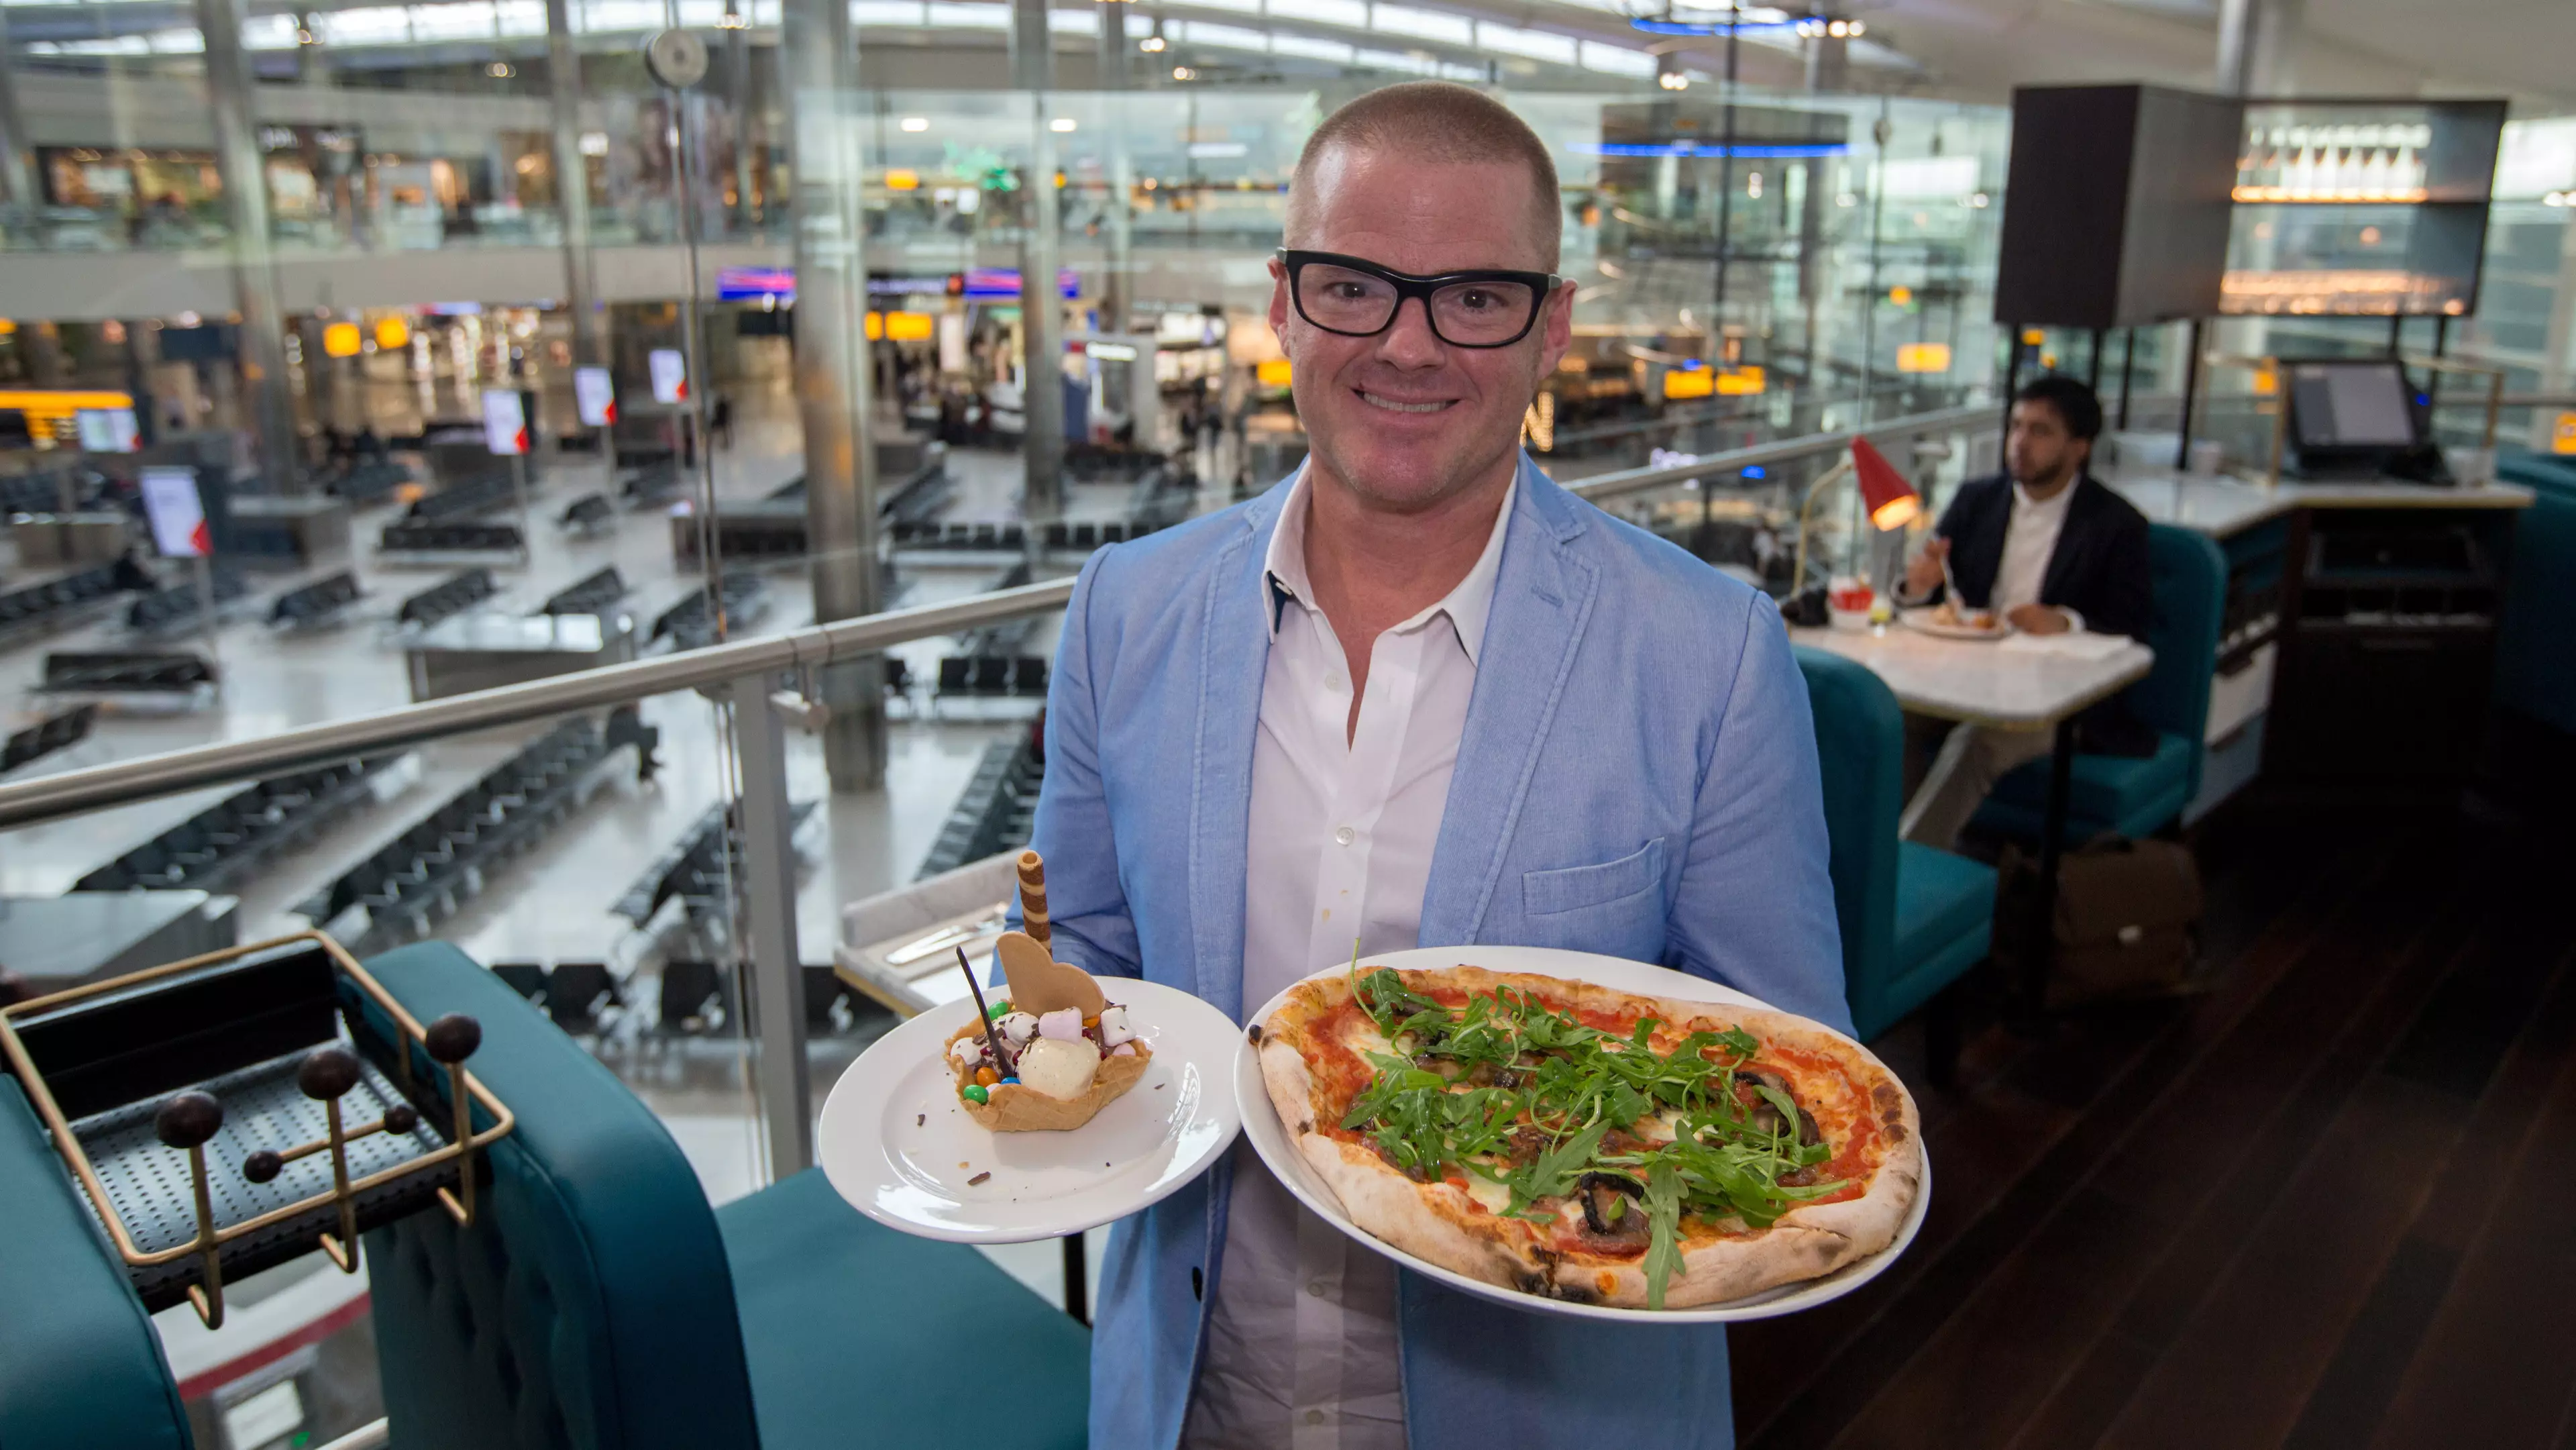 Heston Blumenthal Admits To Getting Annoyed By People Taking Pictures Of Food